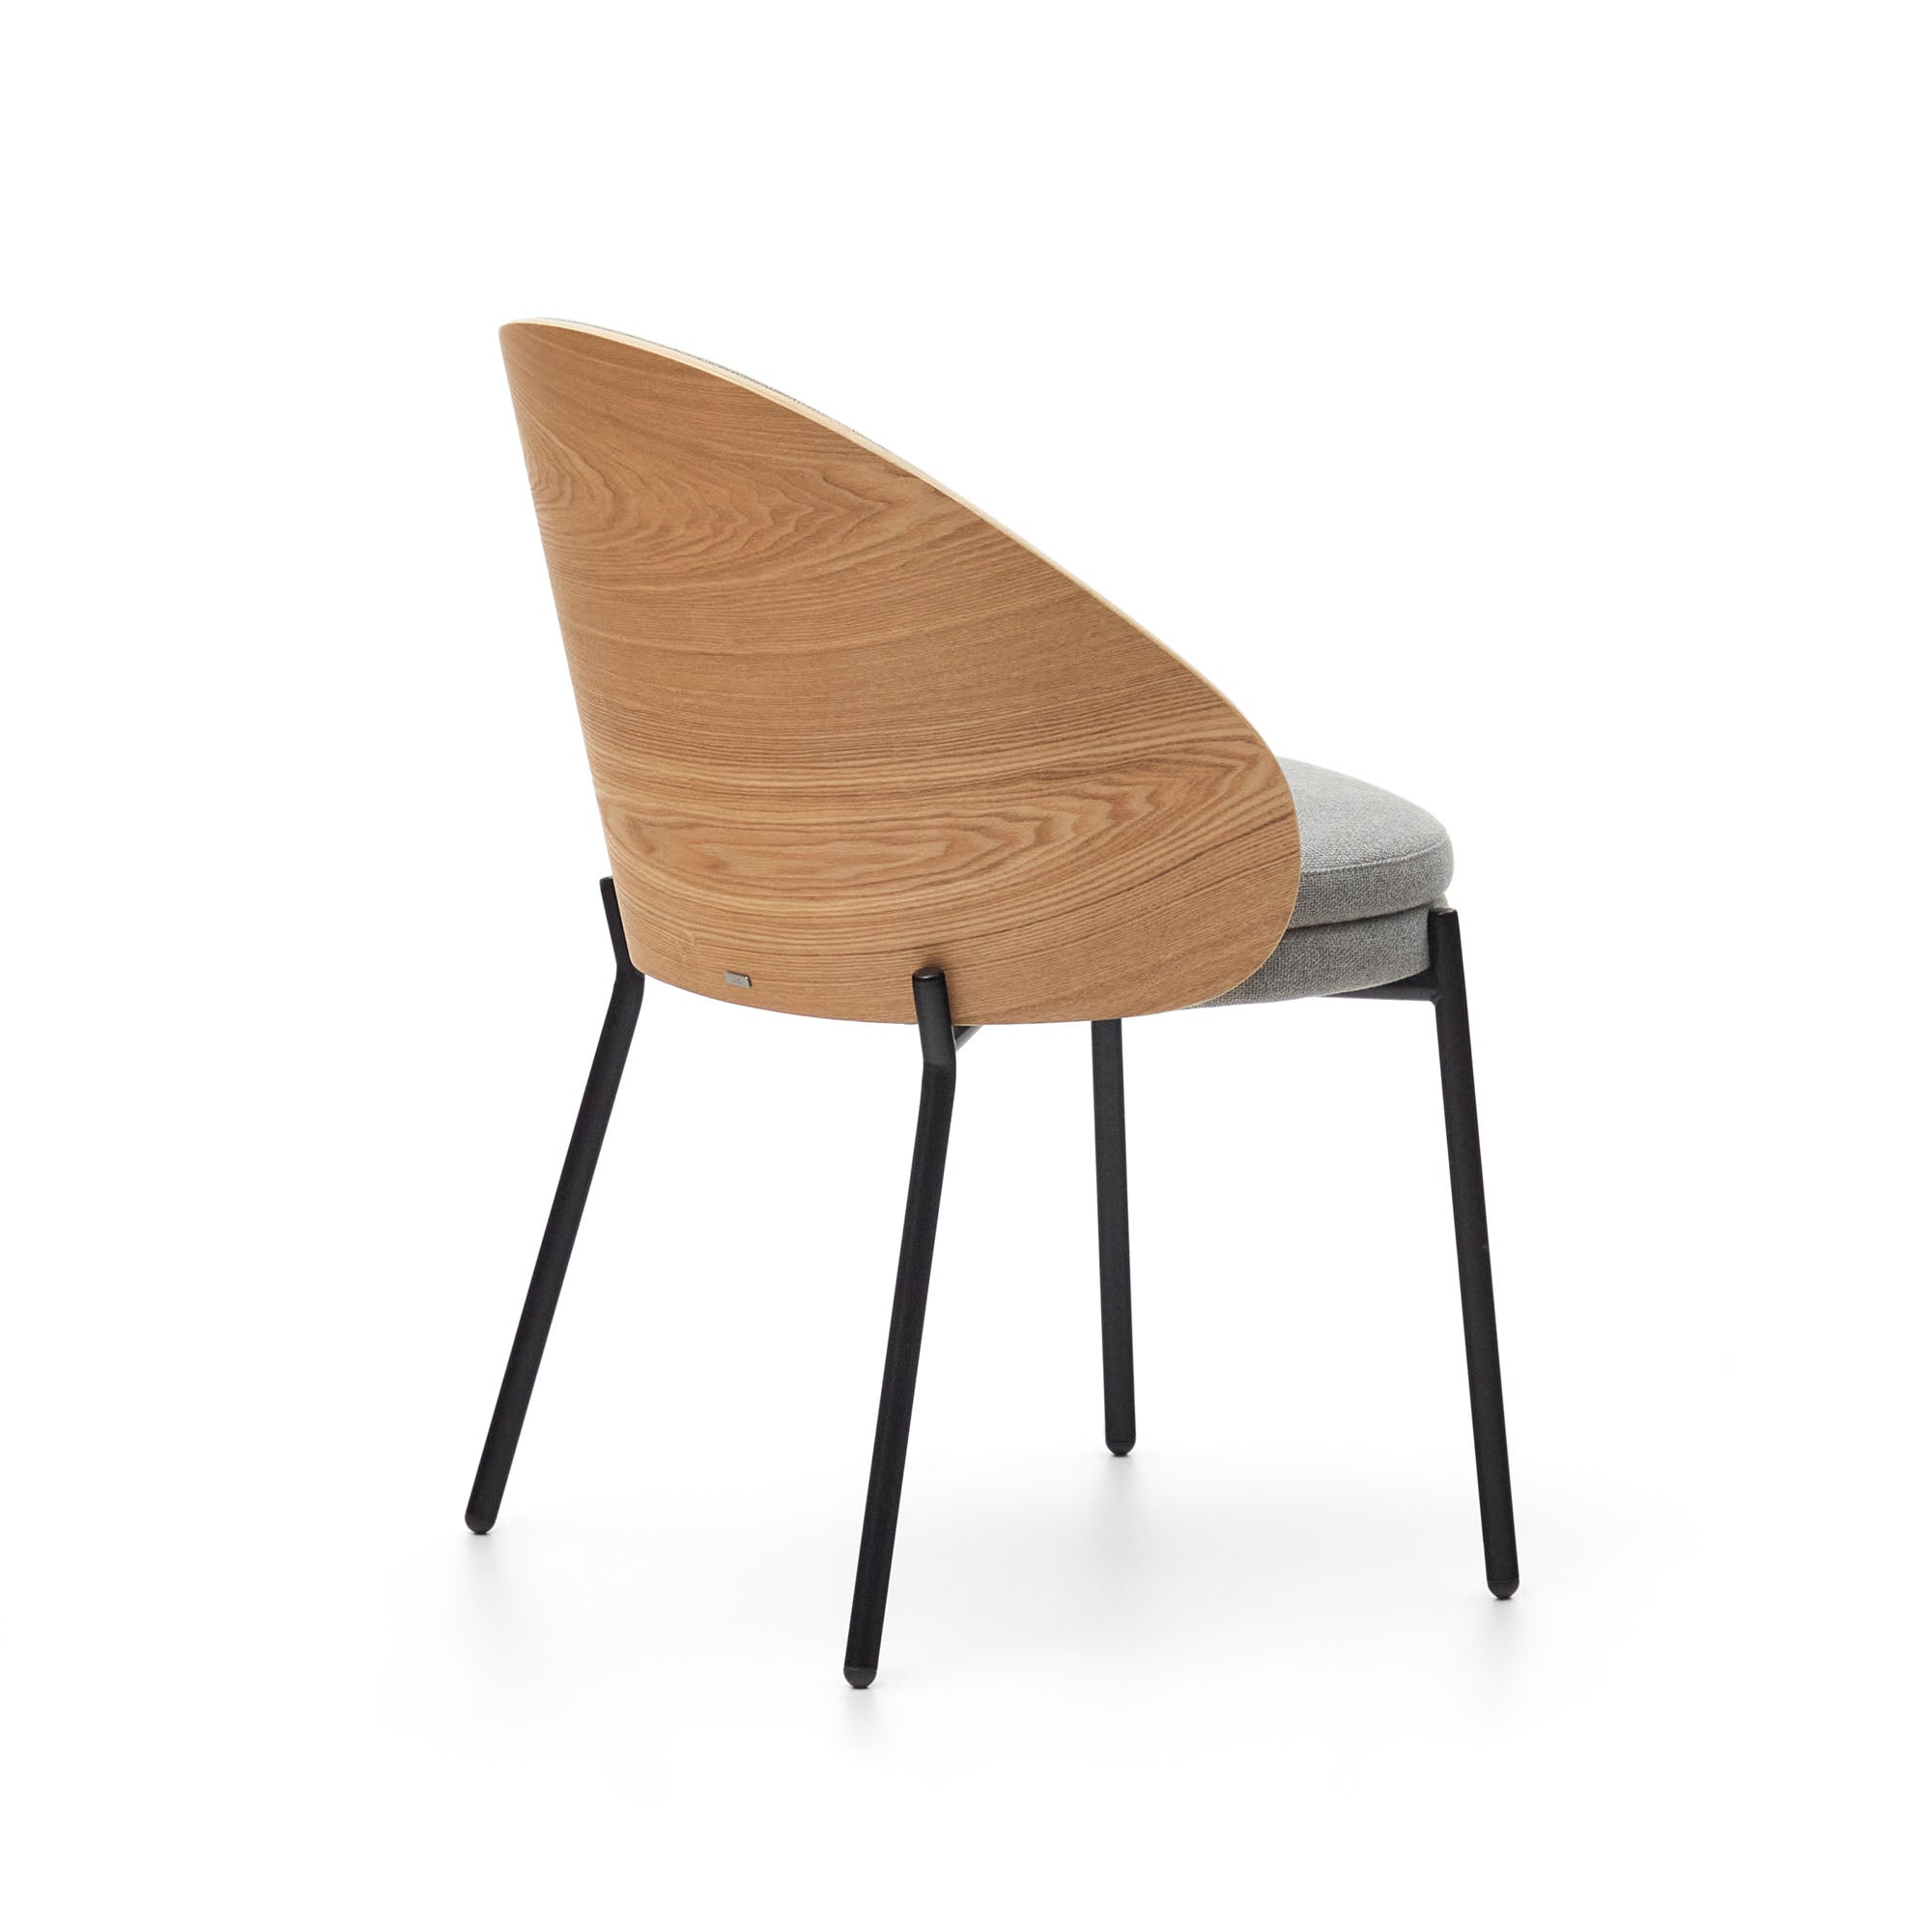 Eamy light grey chair in an ash wood veneer with a natural finish and black metal